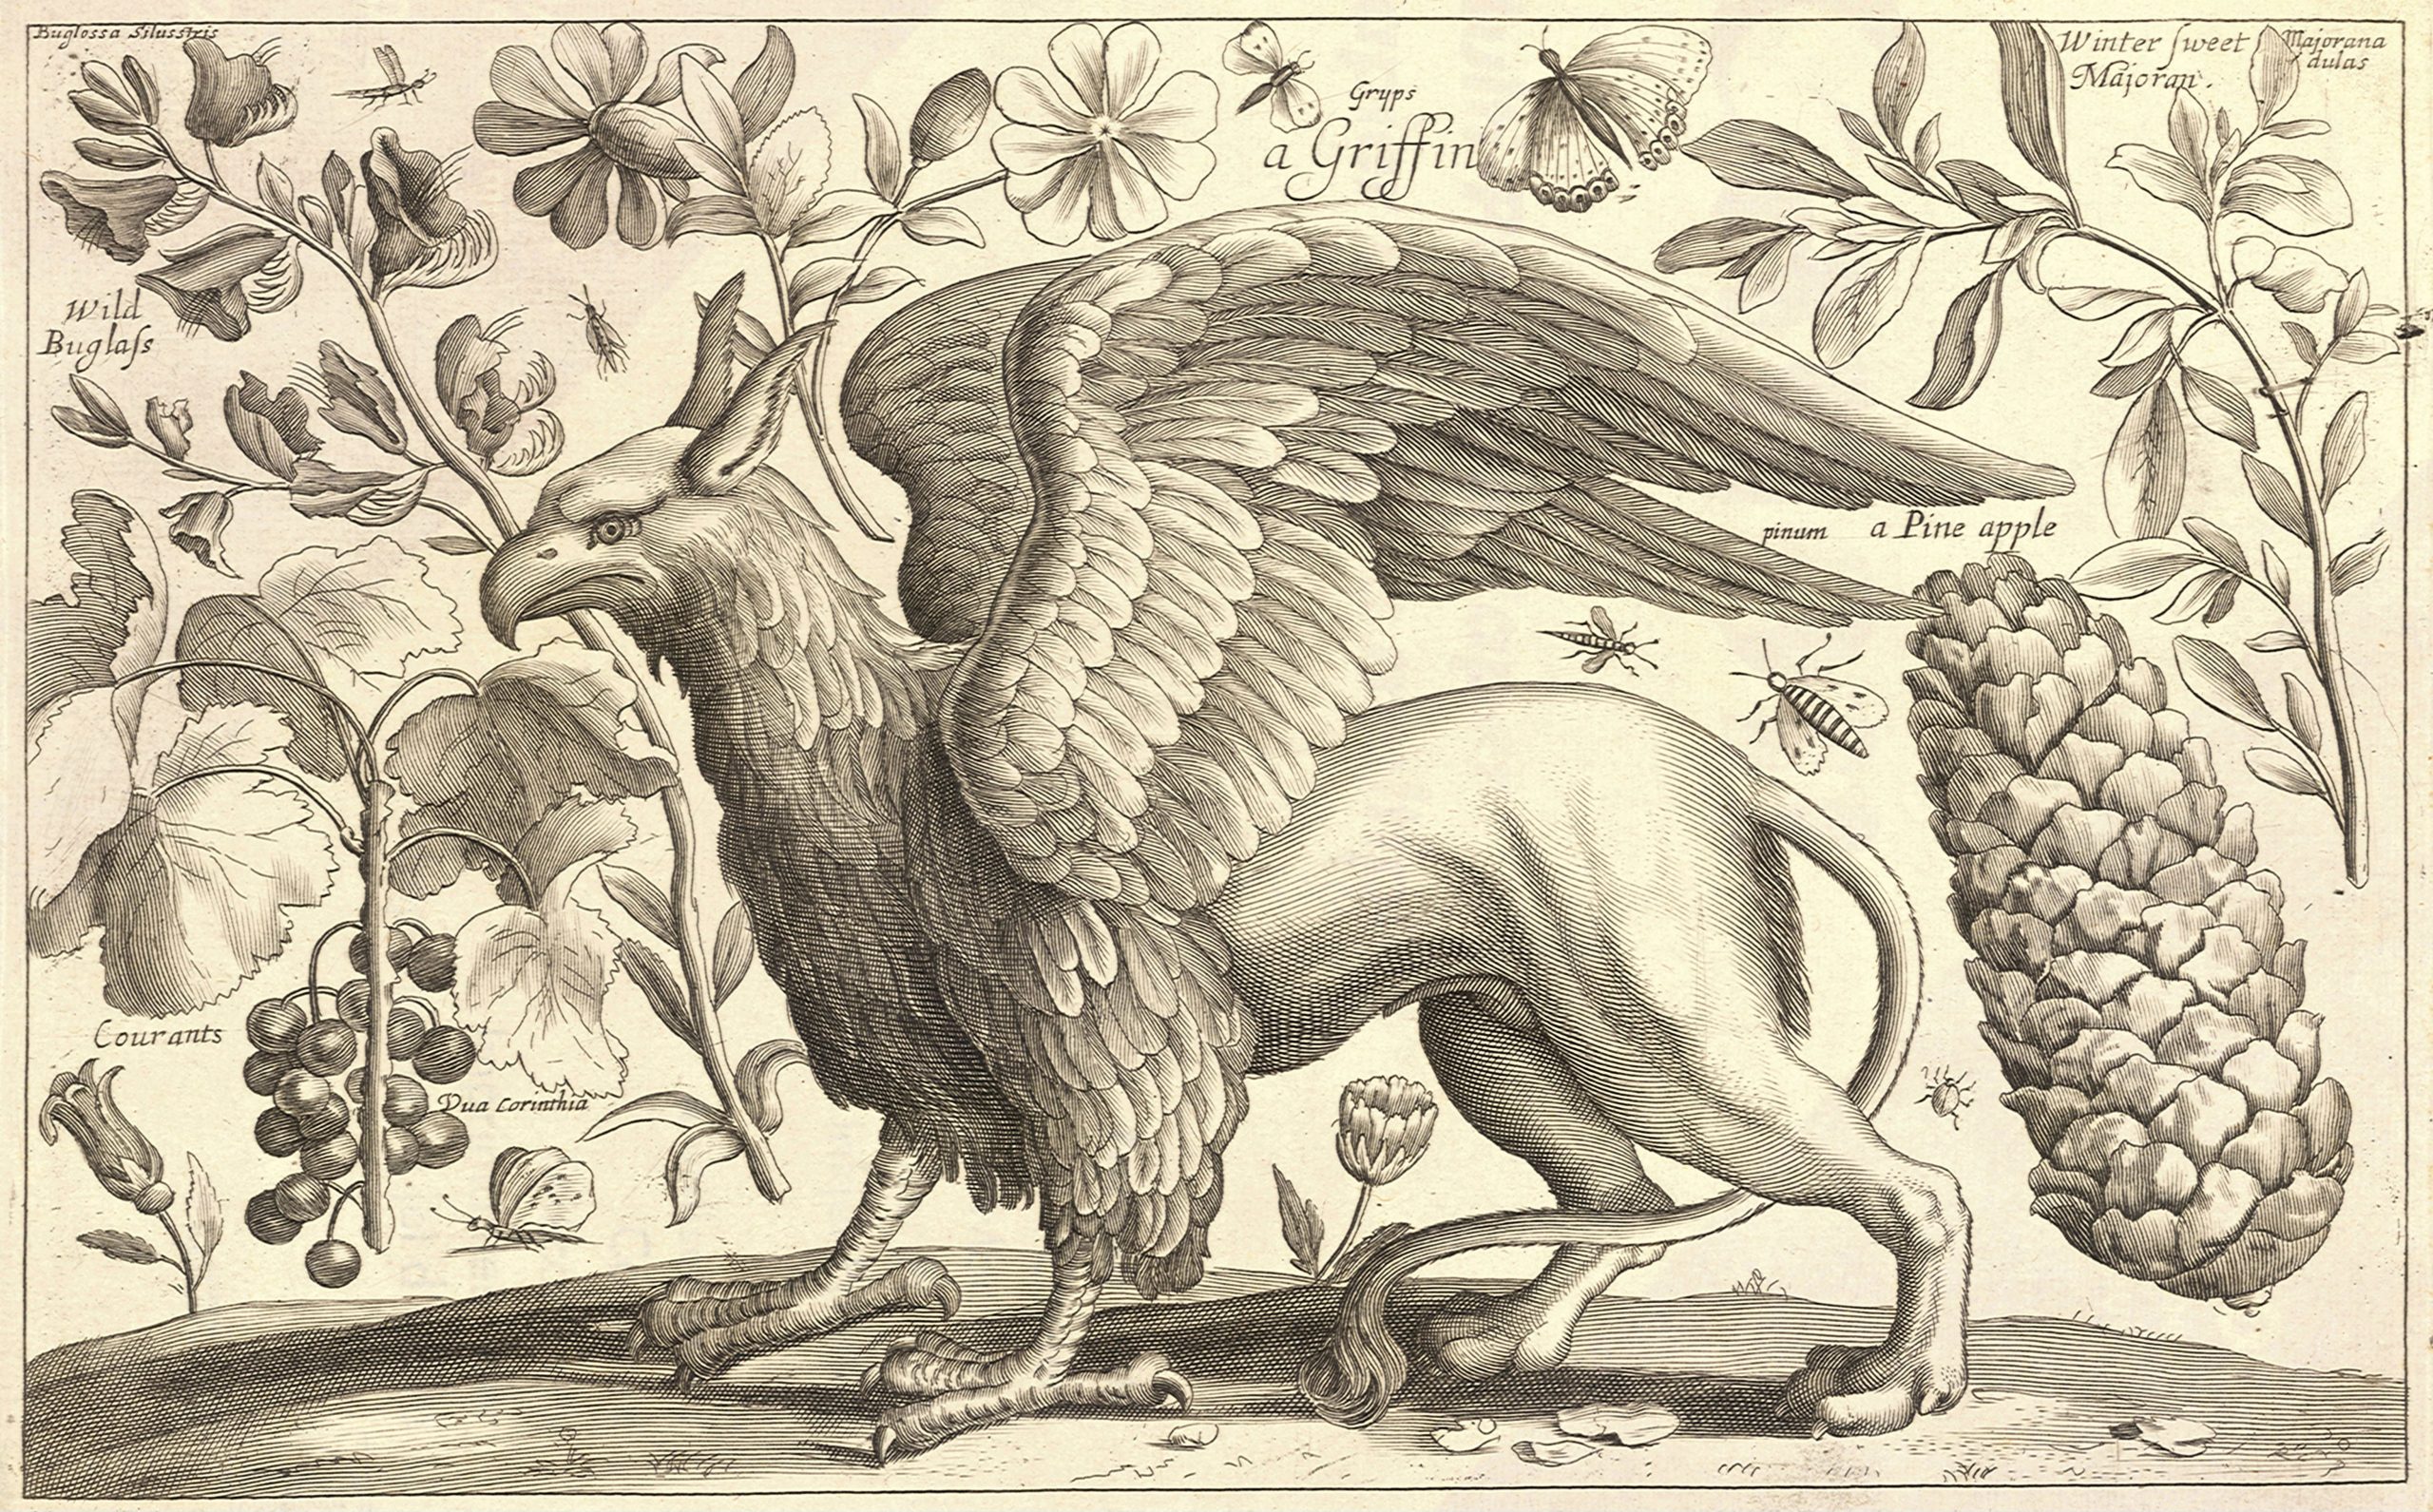 A large griffin with wings and talons stands on the ground and is surrounded by images of other plants and vegetation.